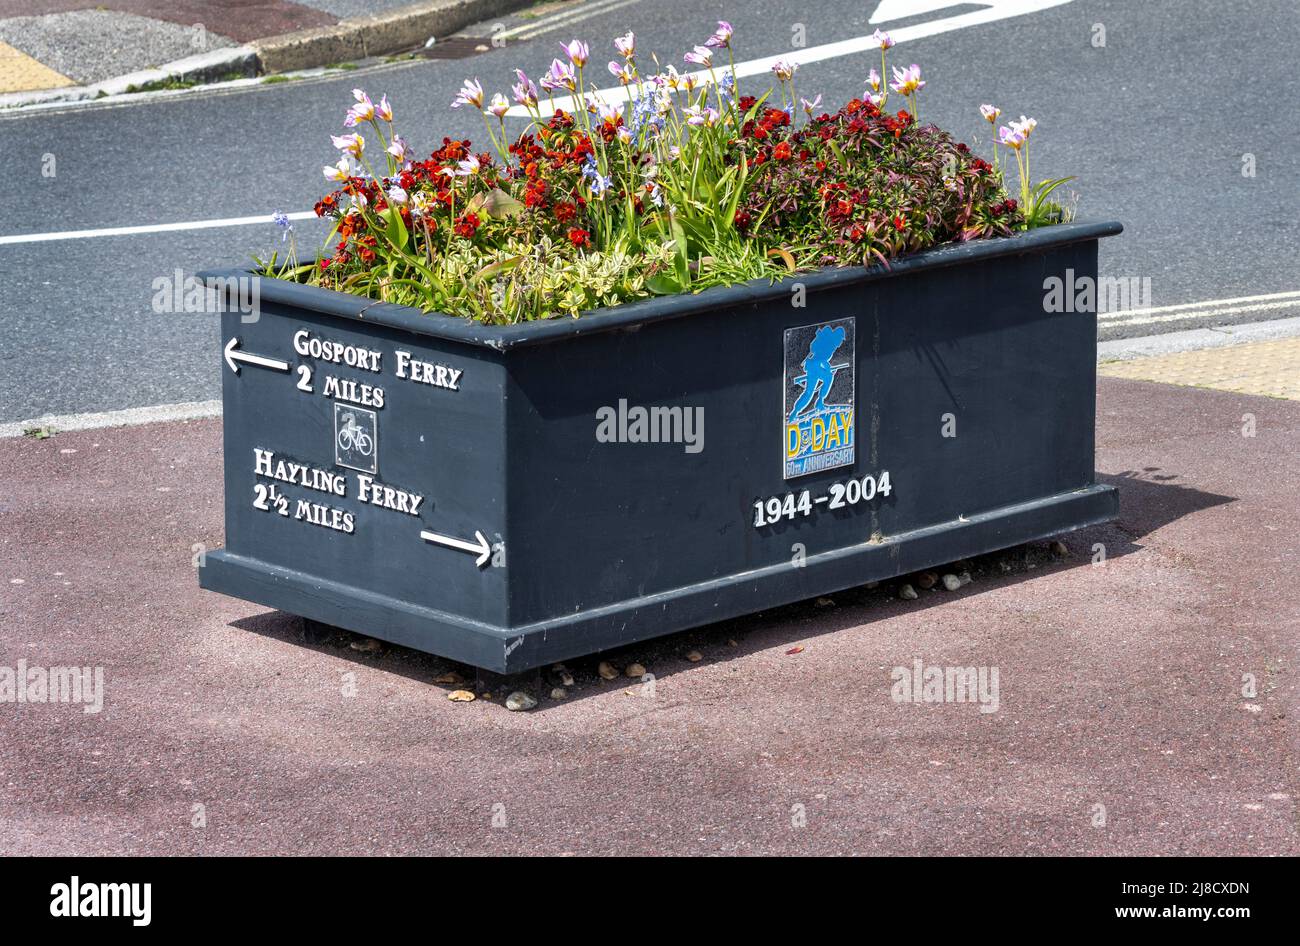 Tourist information, South Seafront, Southsea, Portsmouth, Hampshire, England, UK - directions on a street planter Stock Photo